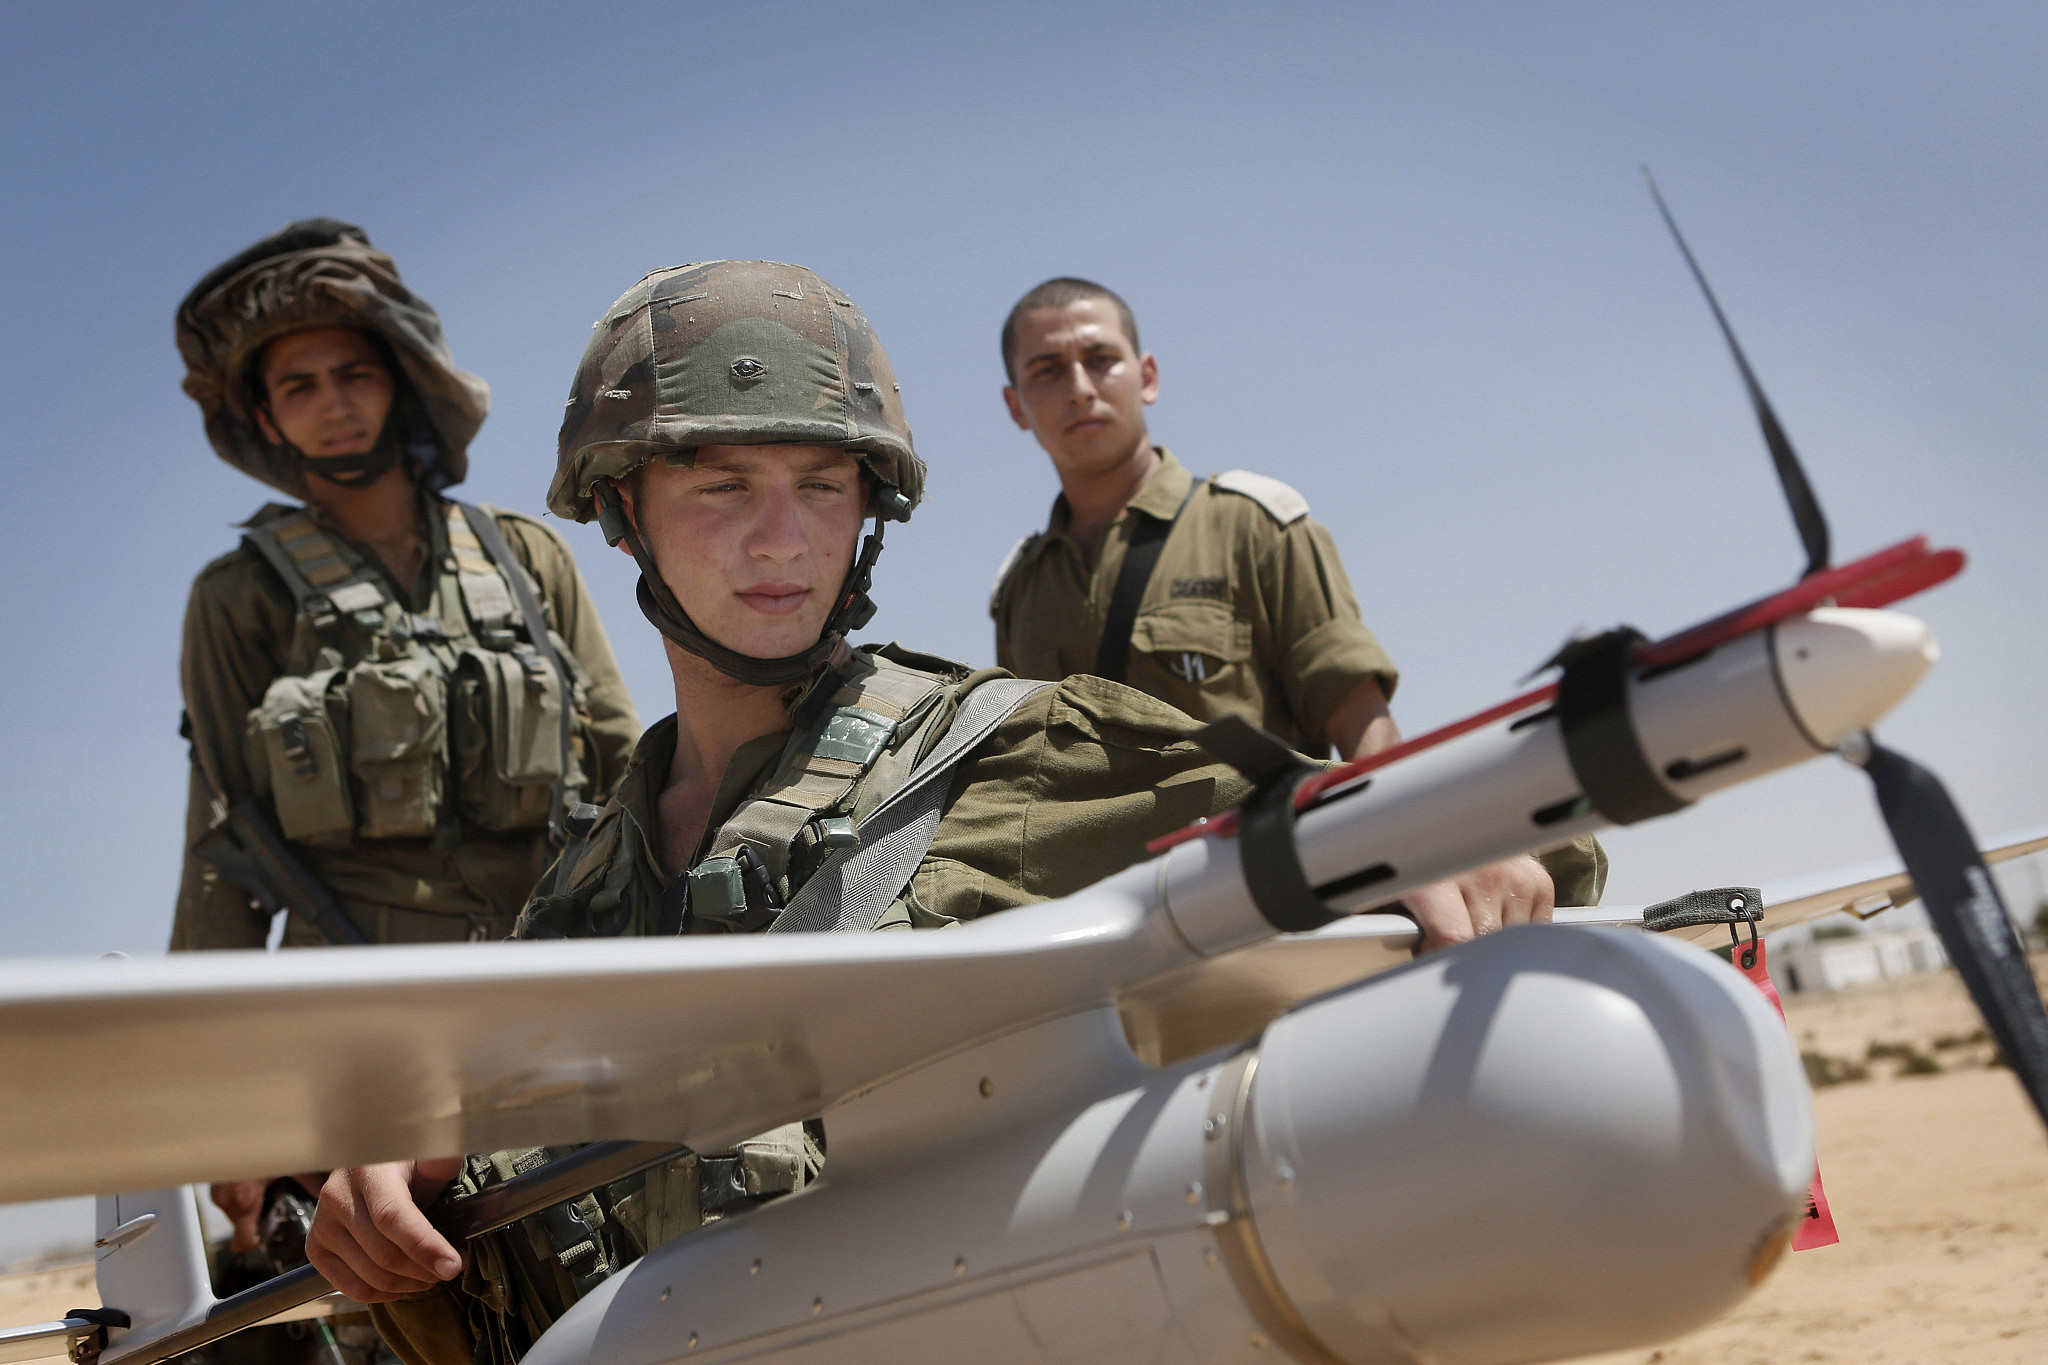 Israeli soldiers of the IDF Sky Rider unit seen during a training drill at the Tze'elim army base, August 5, 2013. (Miriam Alster/Flash90)